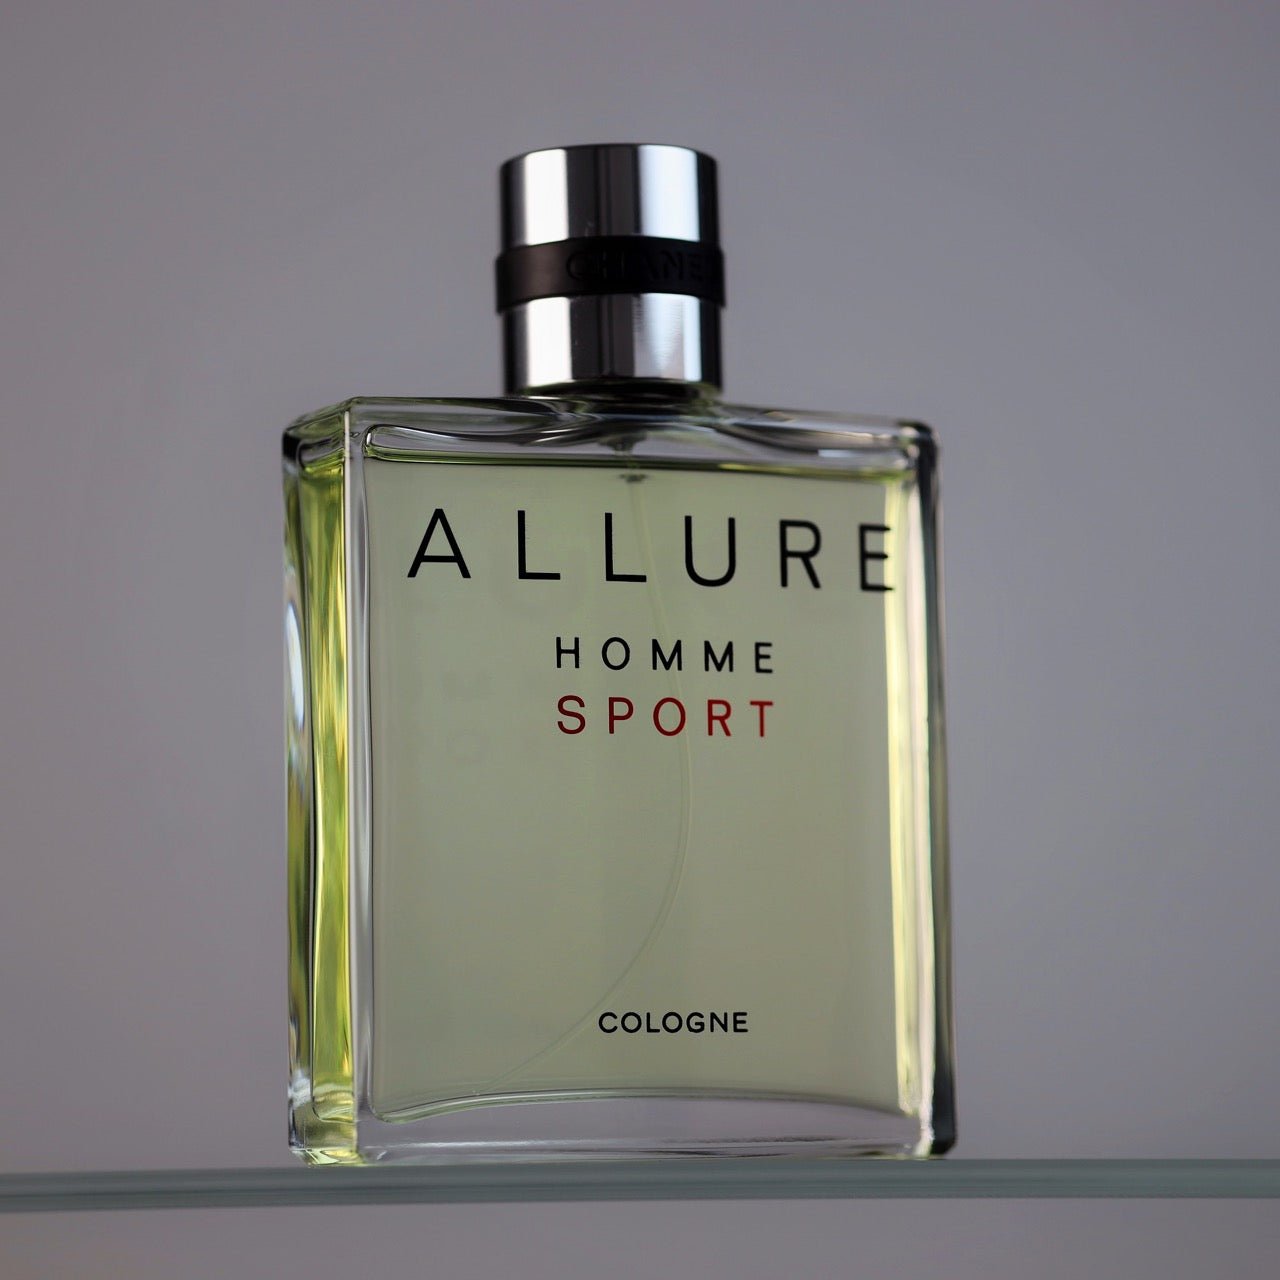 Allure Homme by Chanel - Samples